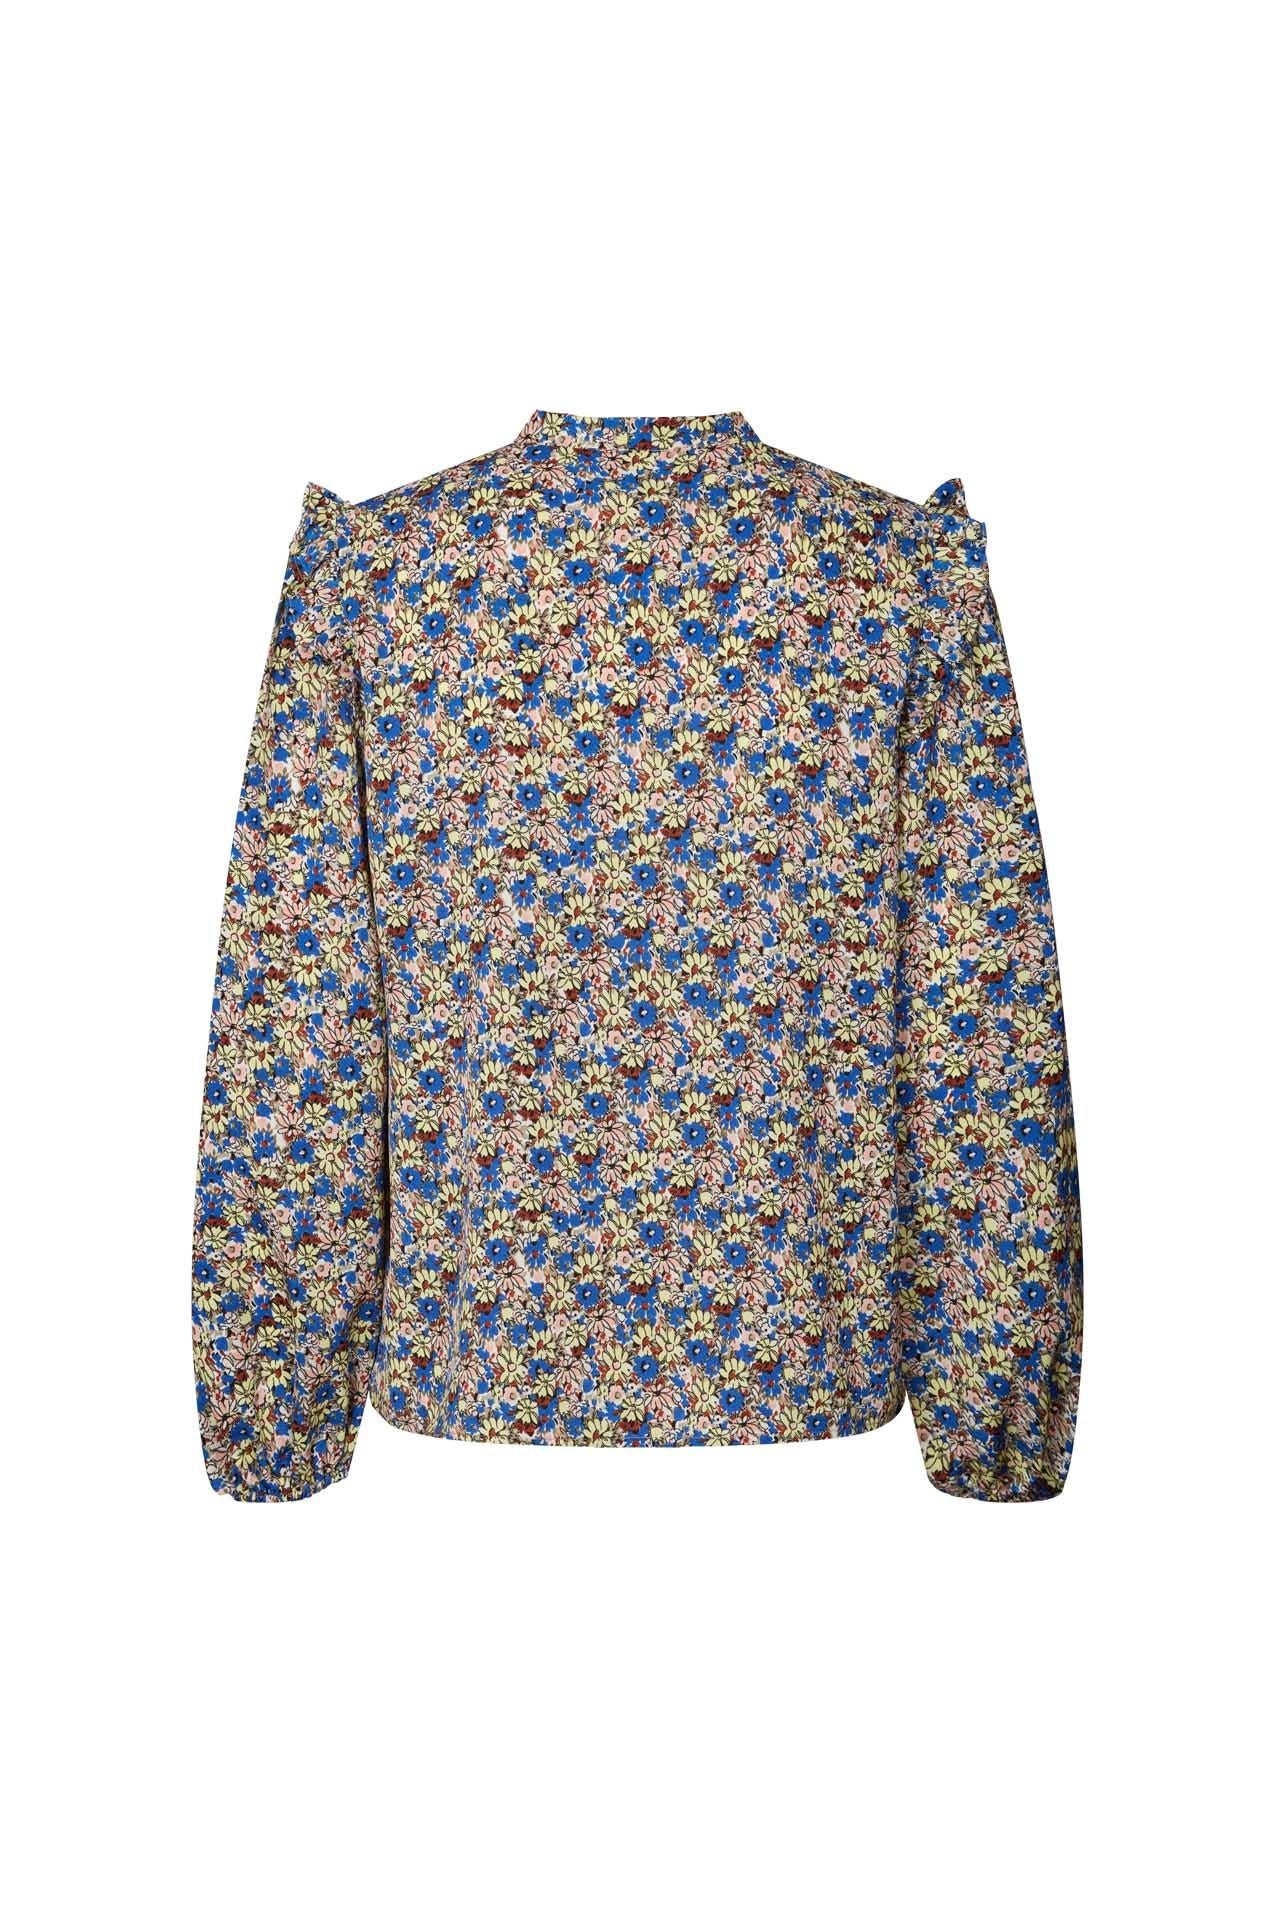 Lollys Laundry Sue Shirt - Multi Floral LUCKY LAST SMALL